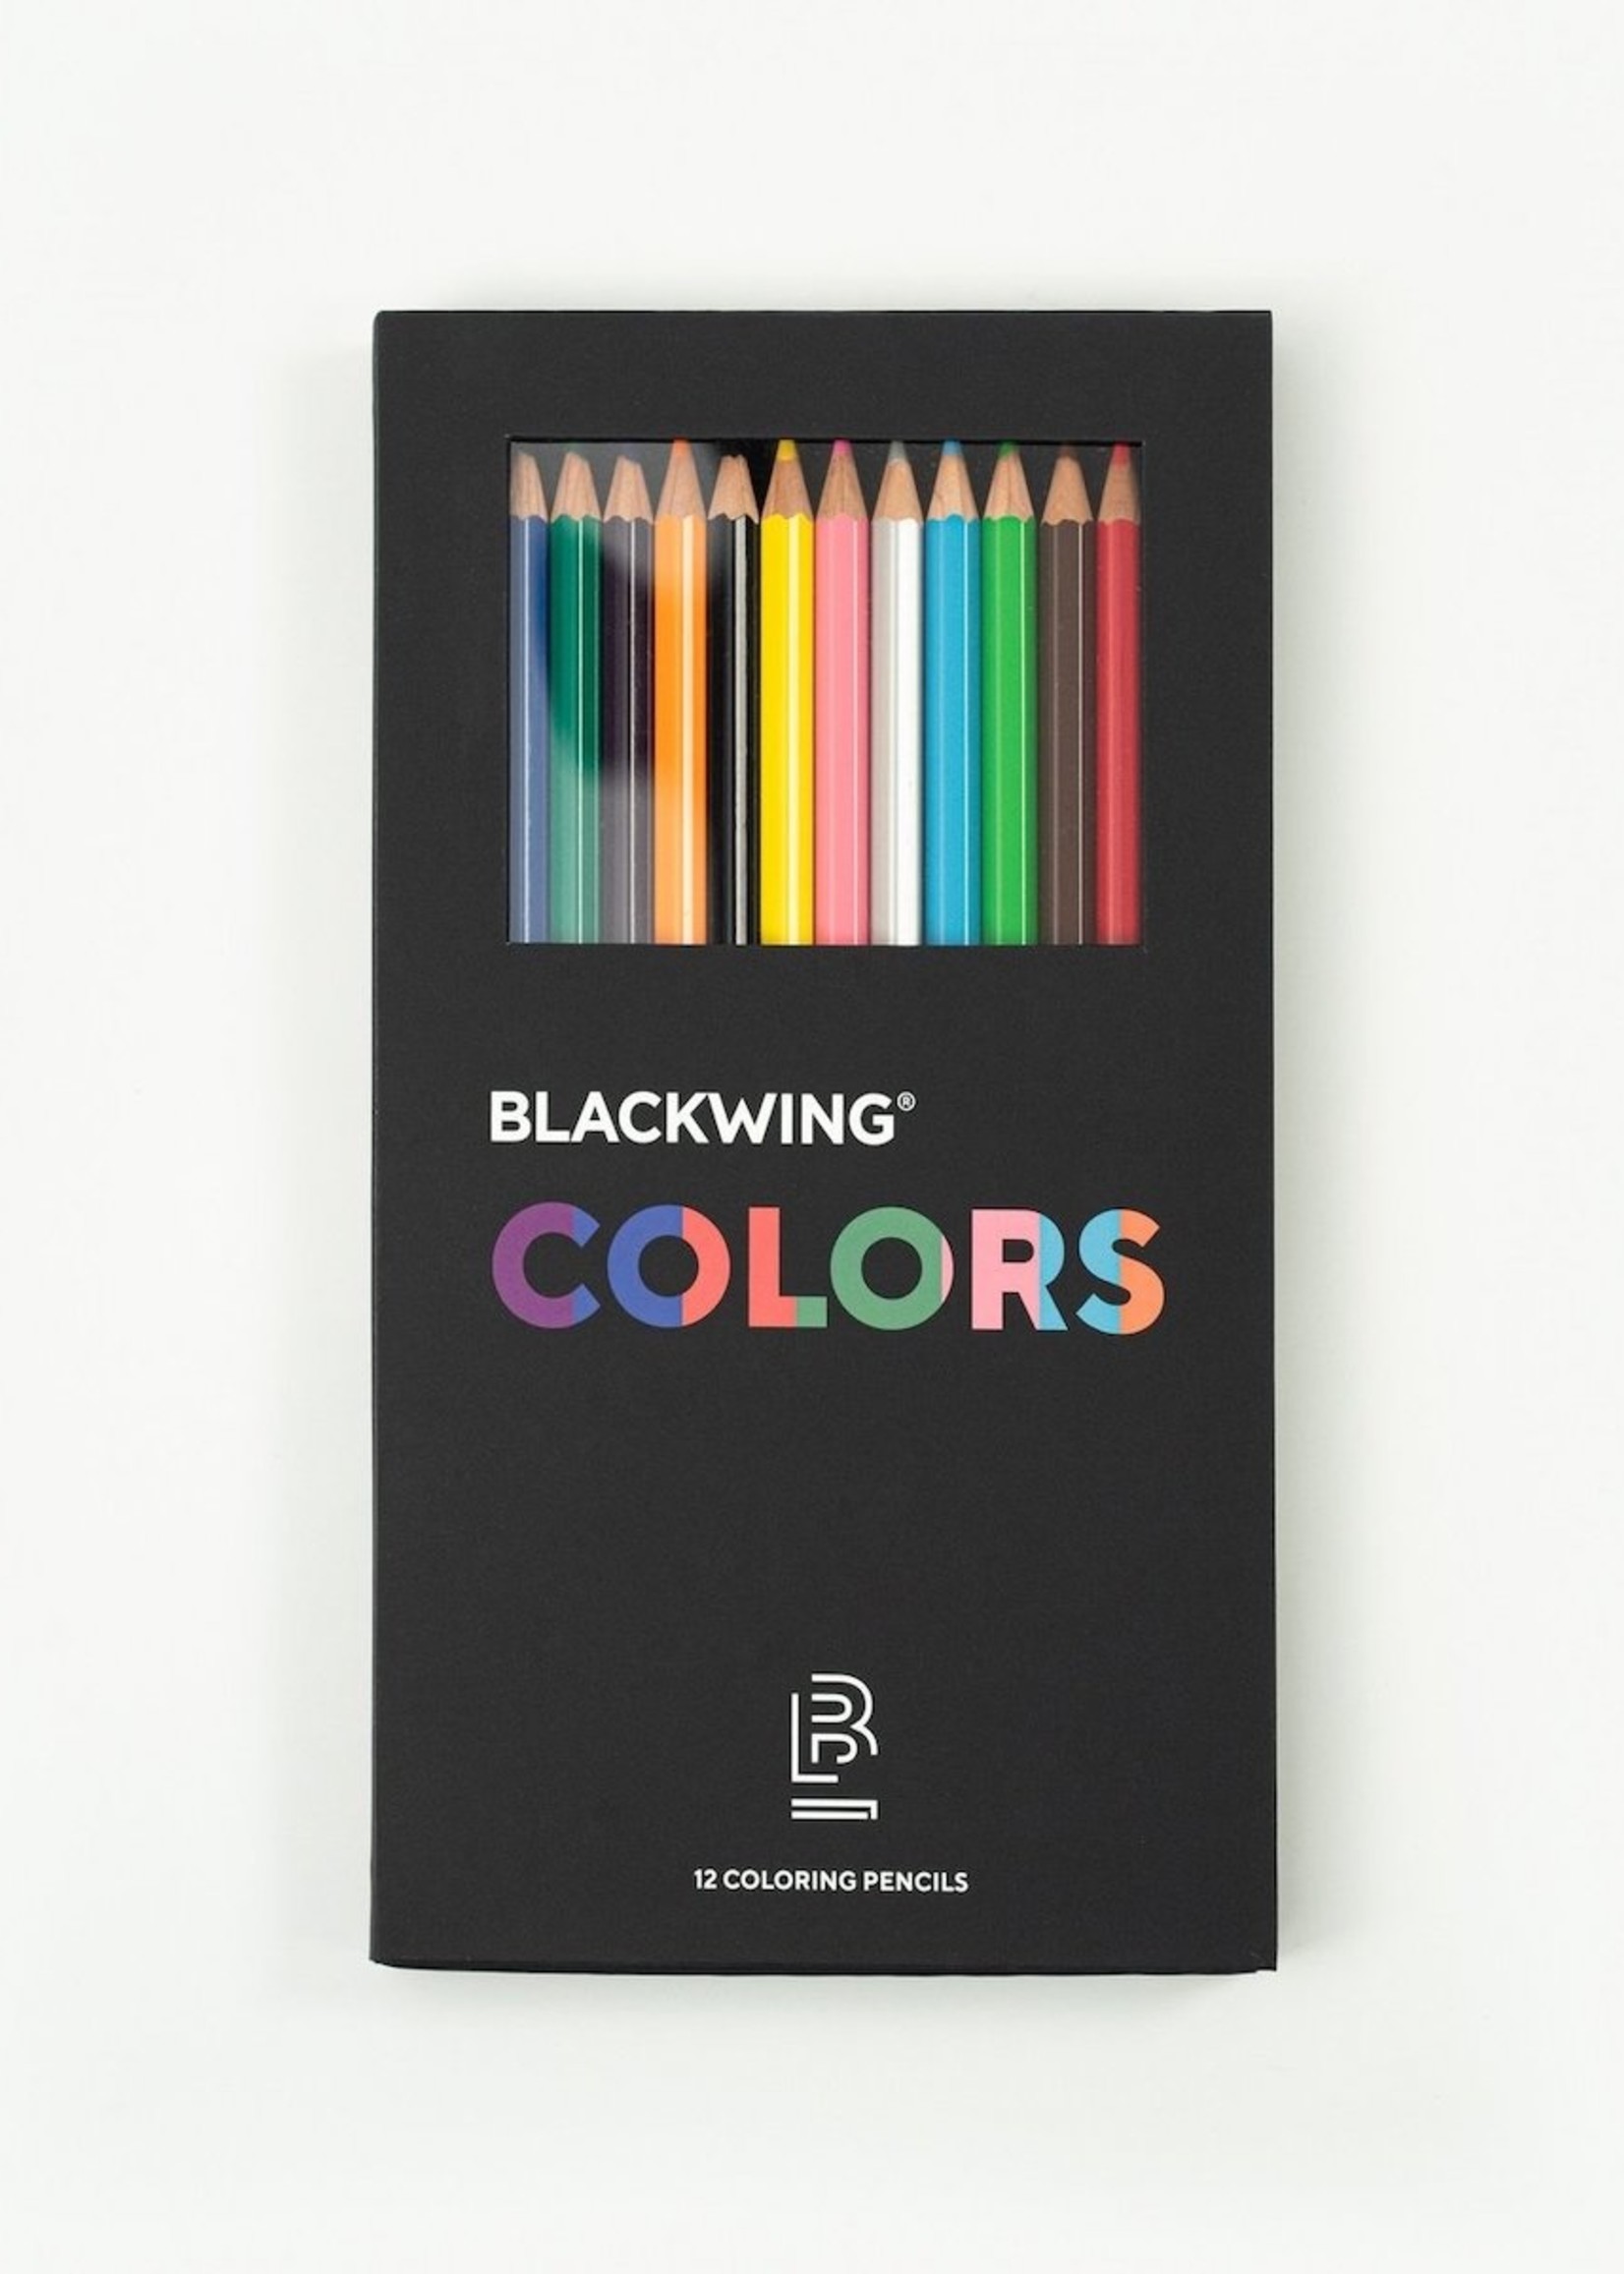 Blackwing Blackwing Colored Pencils